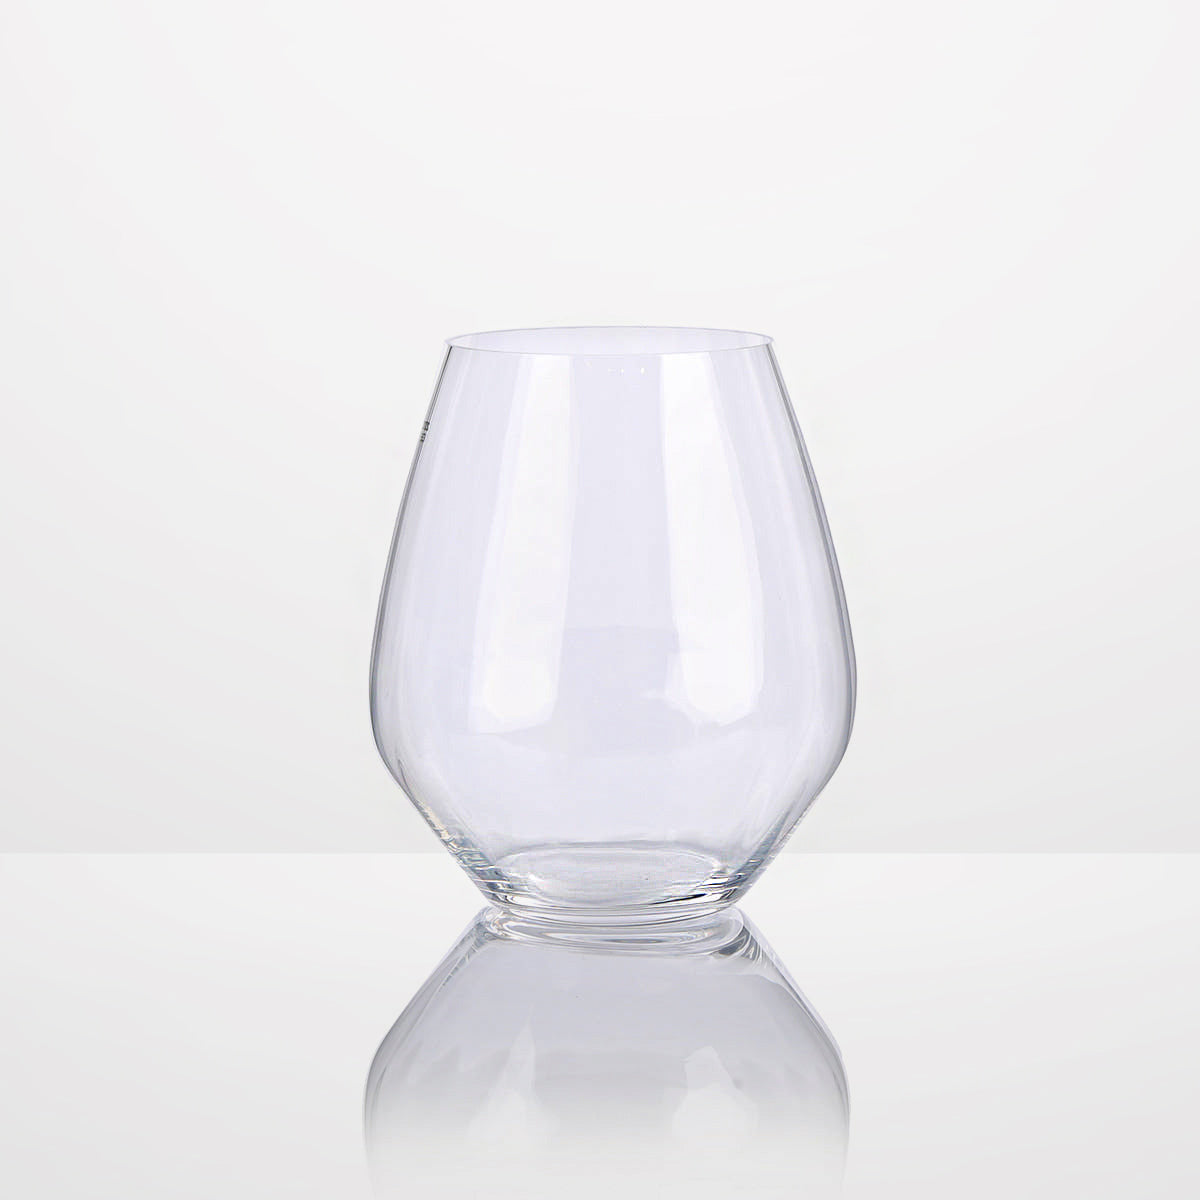 Spiegelau Gin and Tonic Glasses, Set of 4